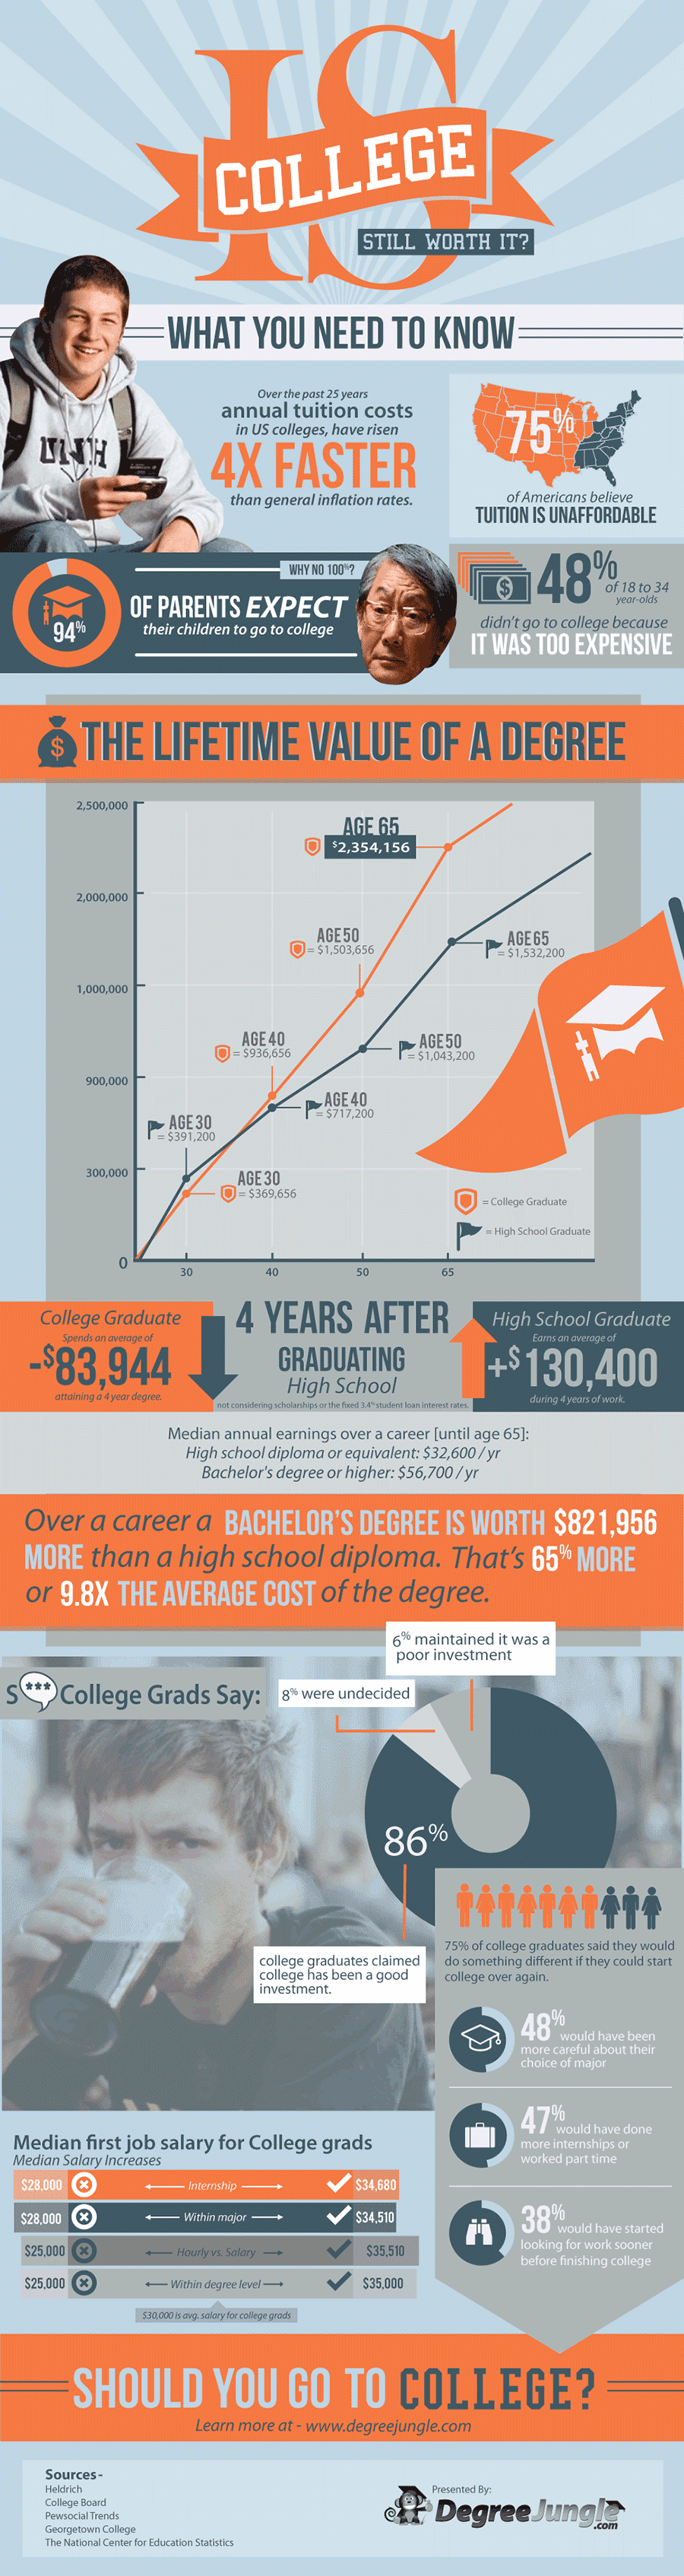 Is College Still Worth It? (Infographic) Business 2 Community